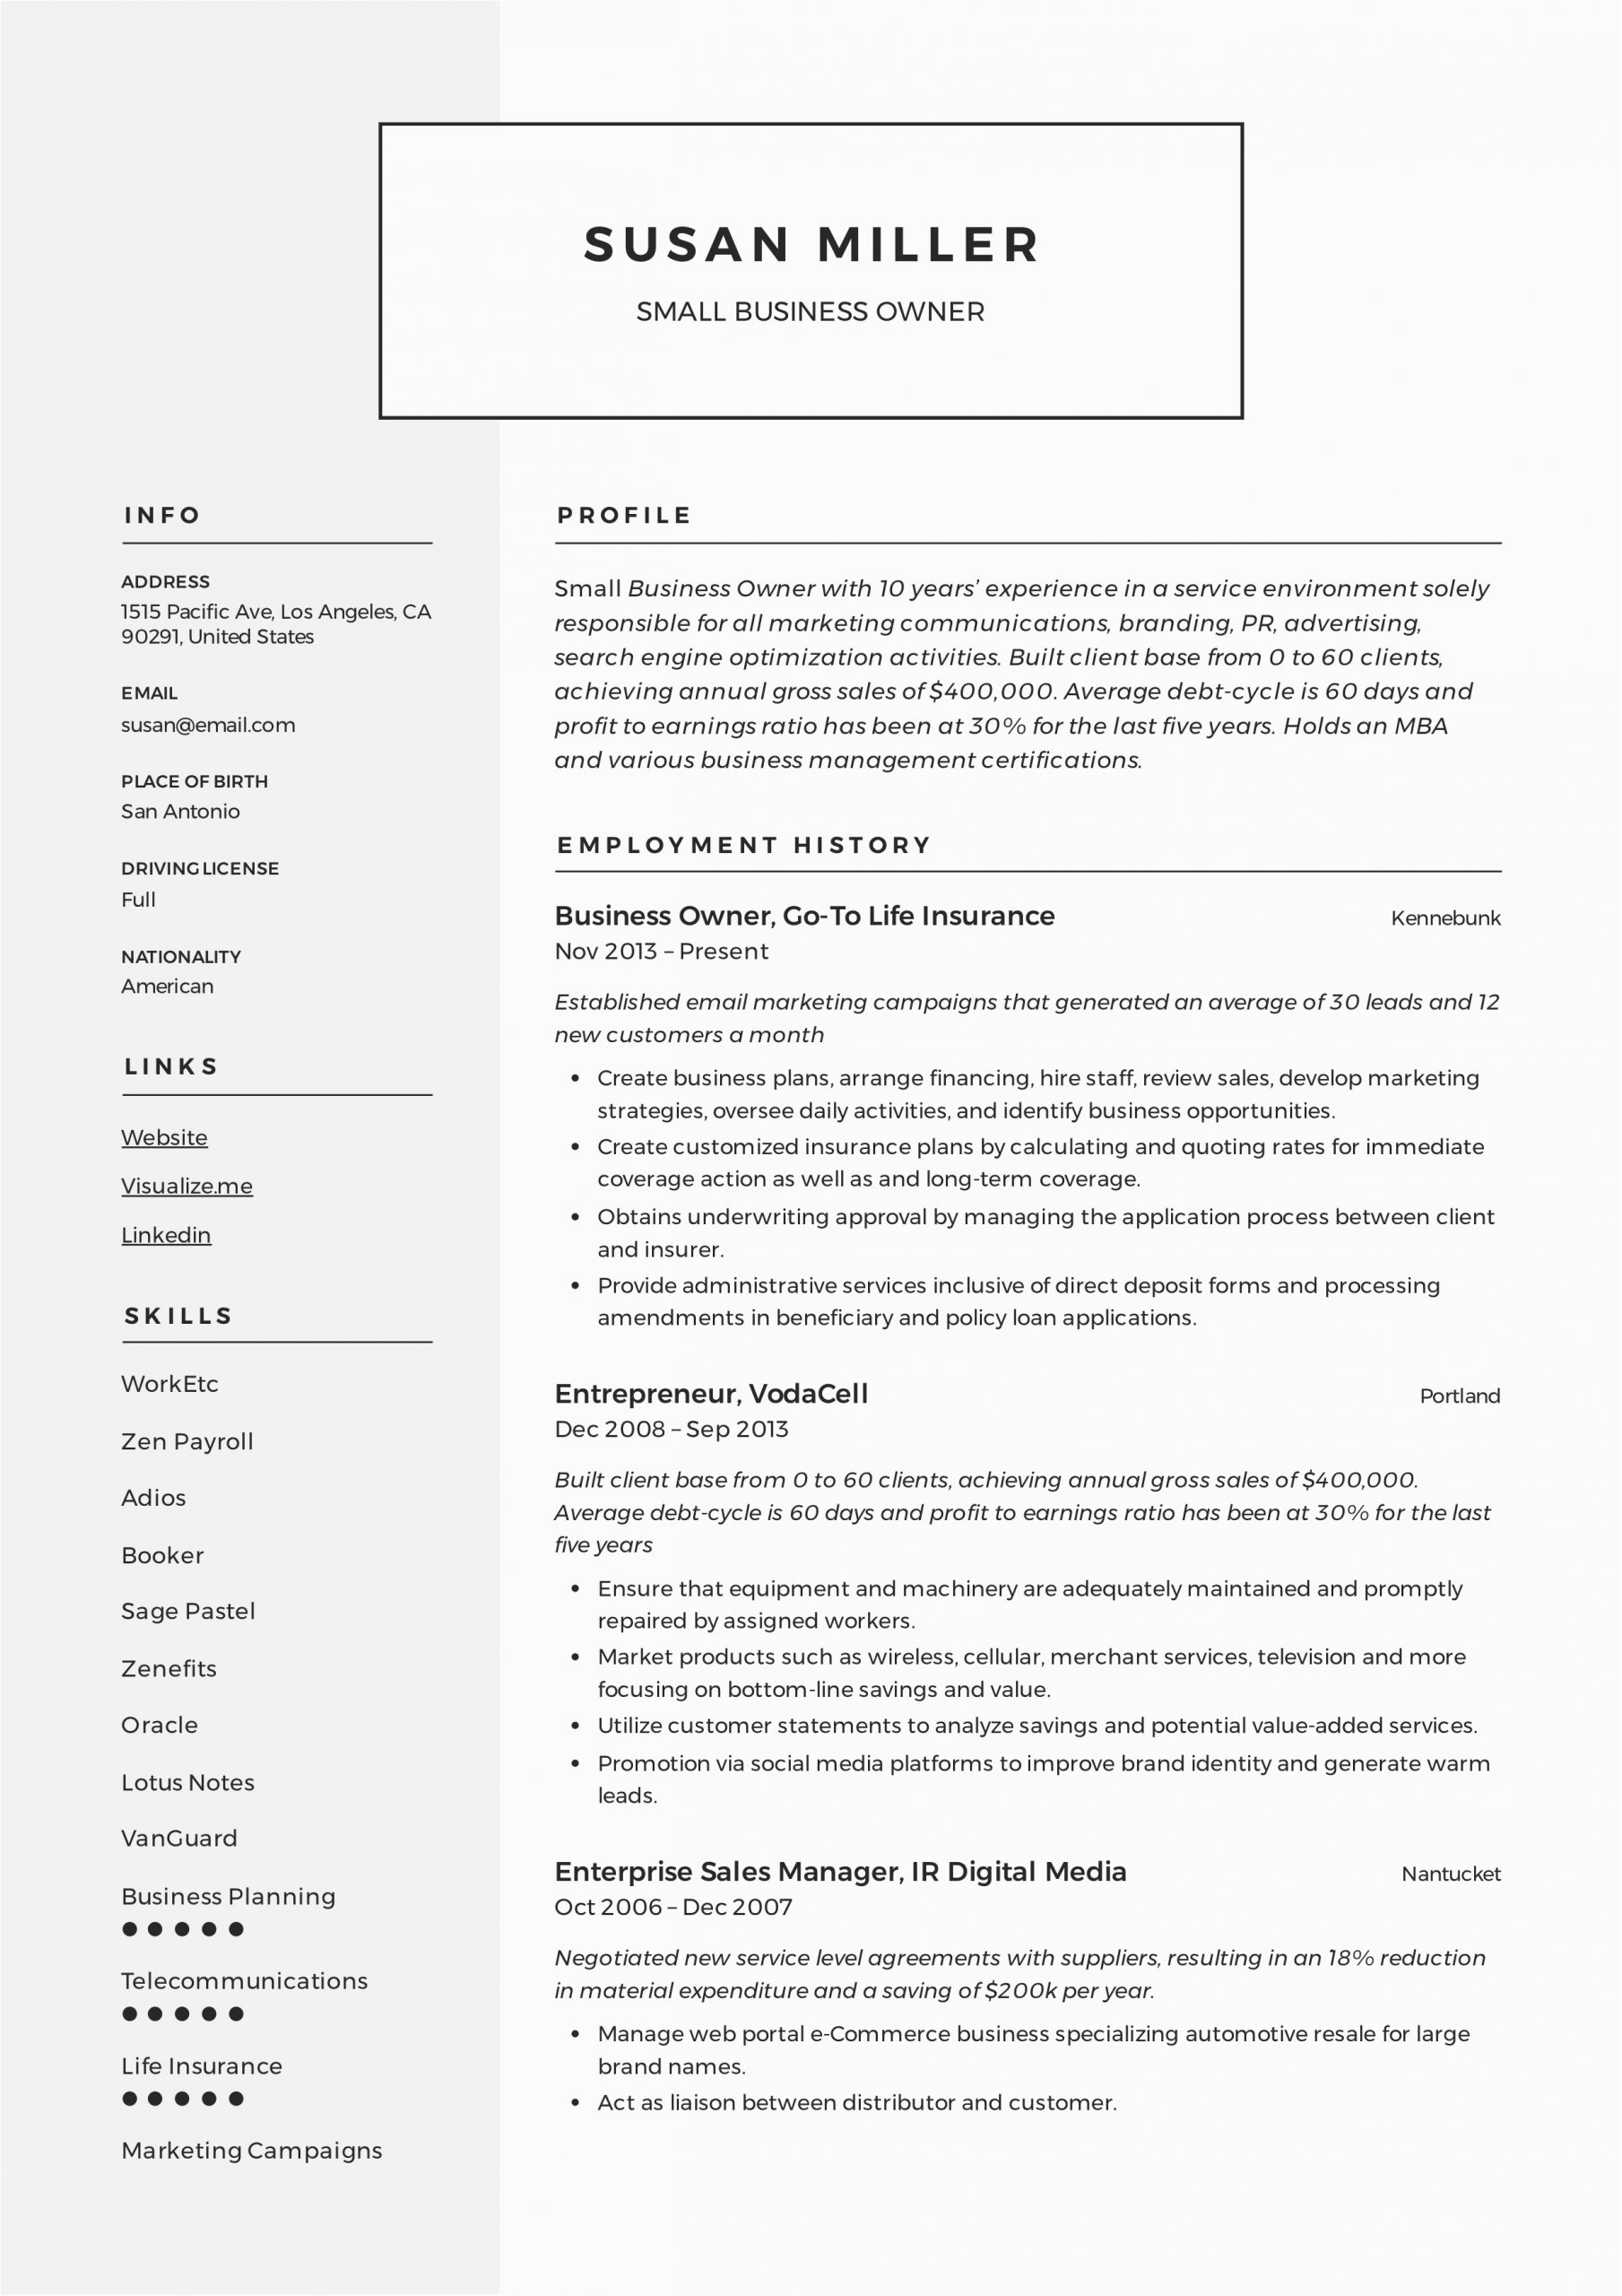 Resume Template for Small Business Owner Small Business Owner Resume Guide 12 Examples Pdf